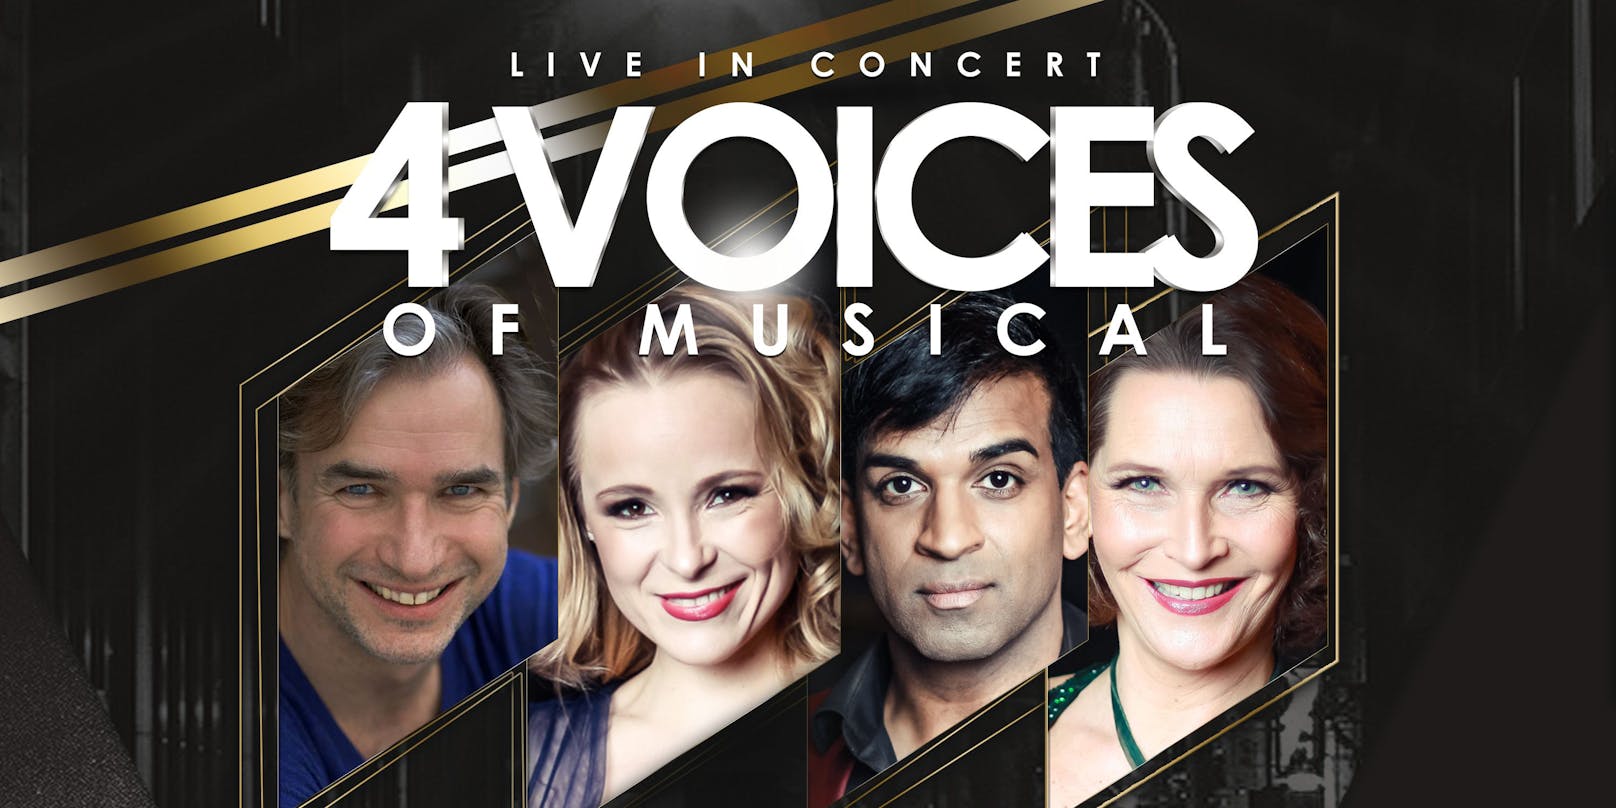 v.l.n.r.: André Bauer, Missy May, Ramesh Nair und Maya Hakvoort sind 4 Voices of Musical.